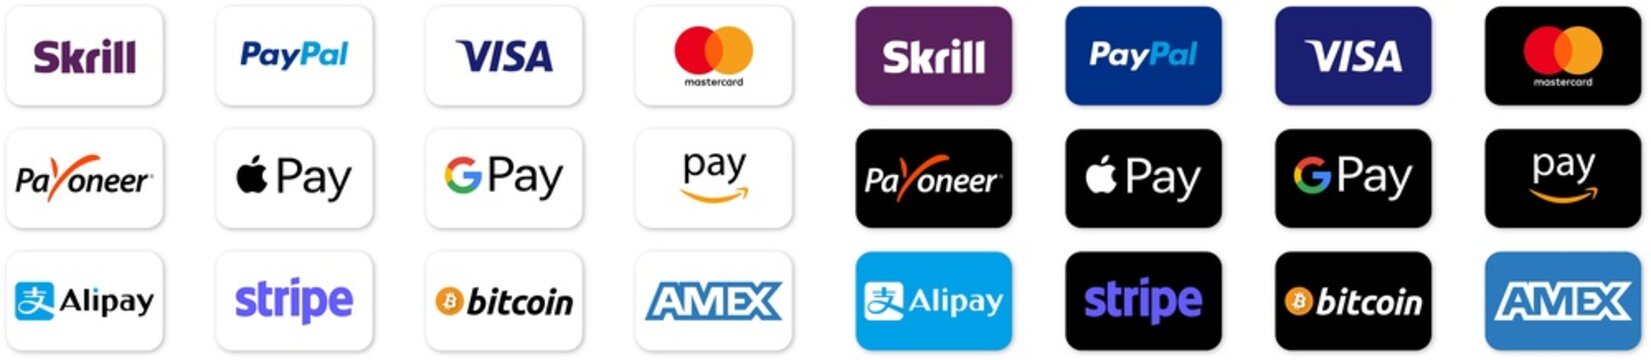 Big set of buttons for online payments, company logos: Visa, Mastercard, Paypal, American Express, Bitcoin, Amazon Pay, Apple Pay, Google. Set of buttons for payment systems on a transparent backgroun